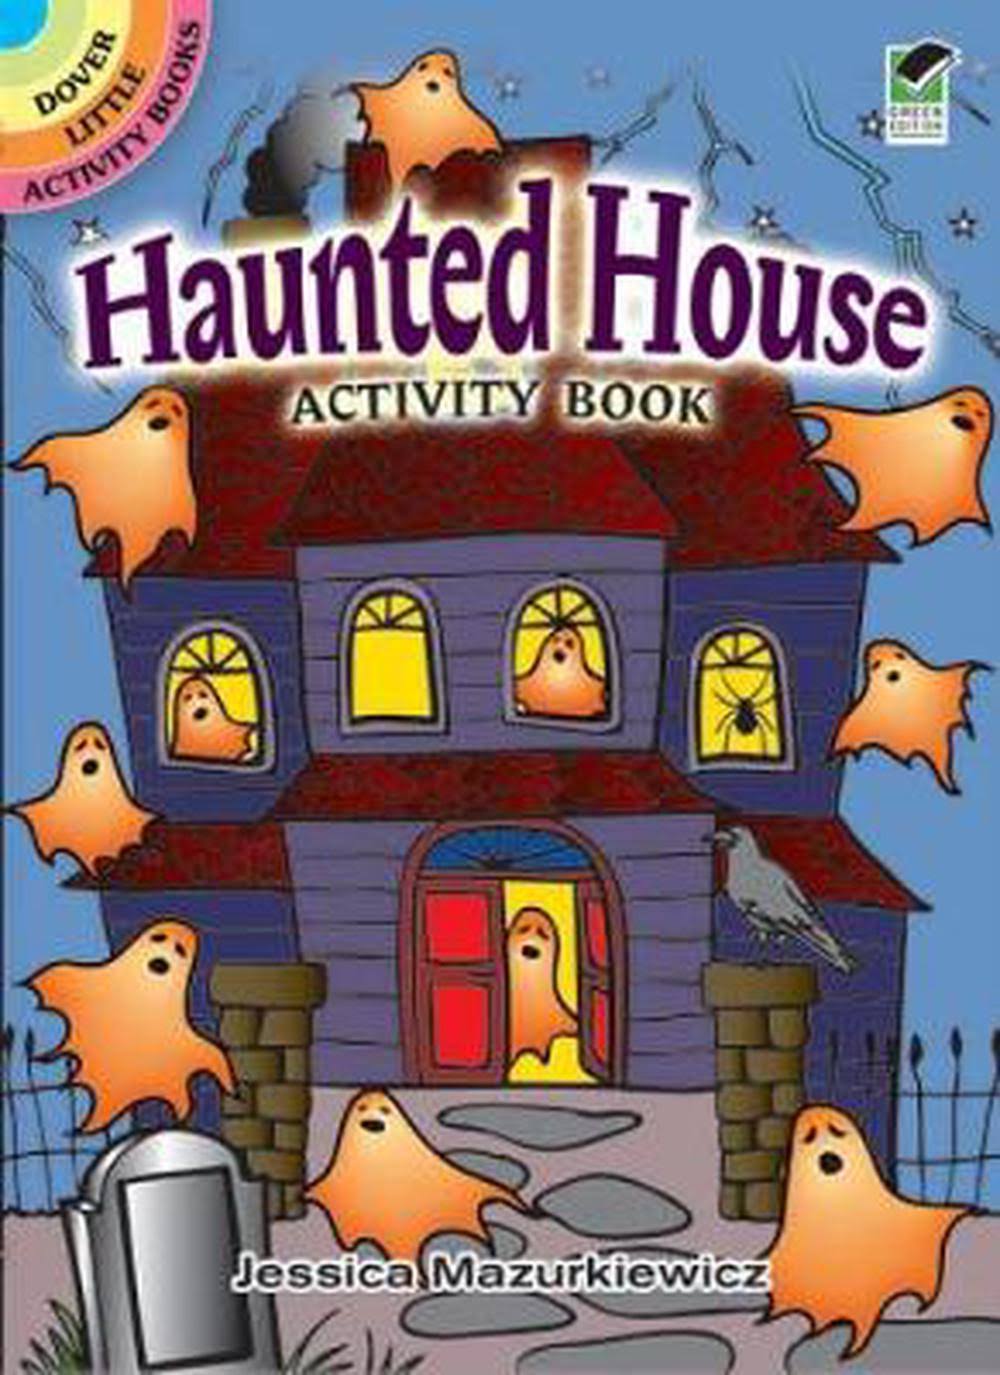 Haunted House Activity Book [Book]